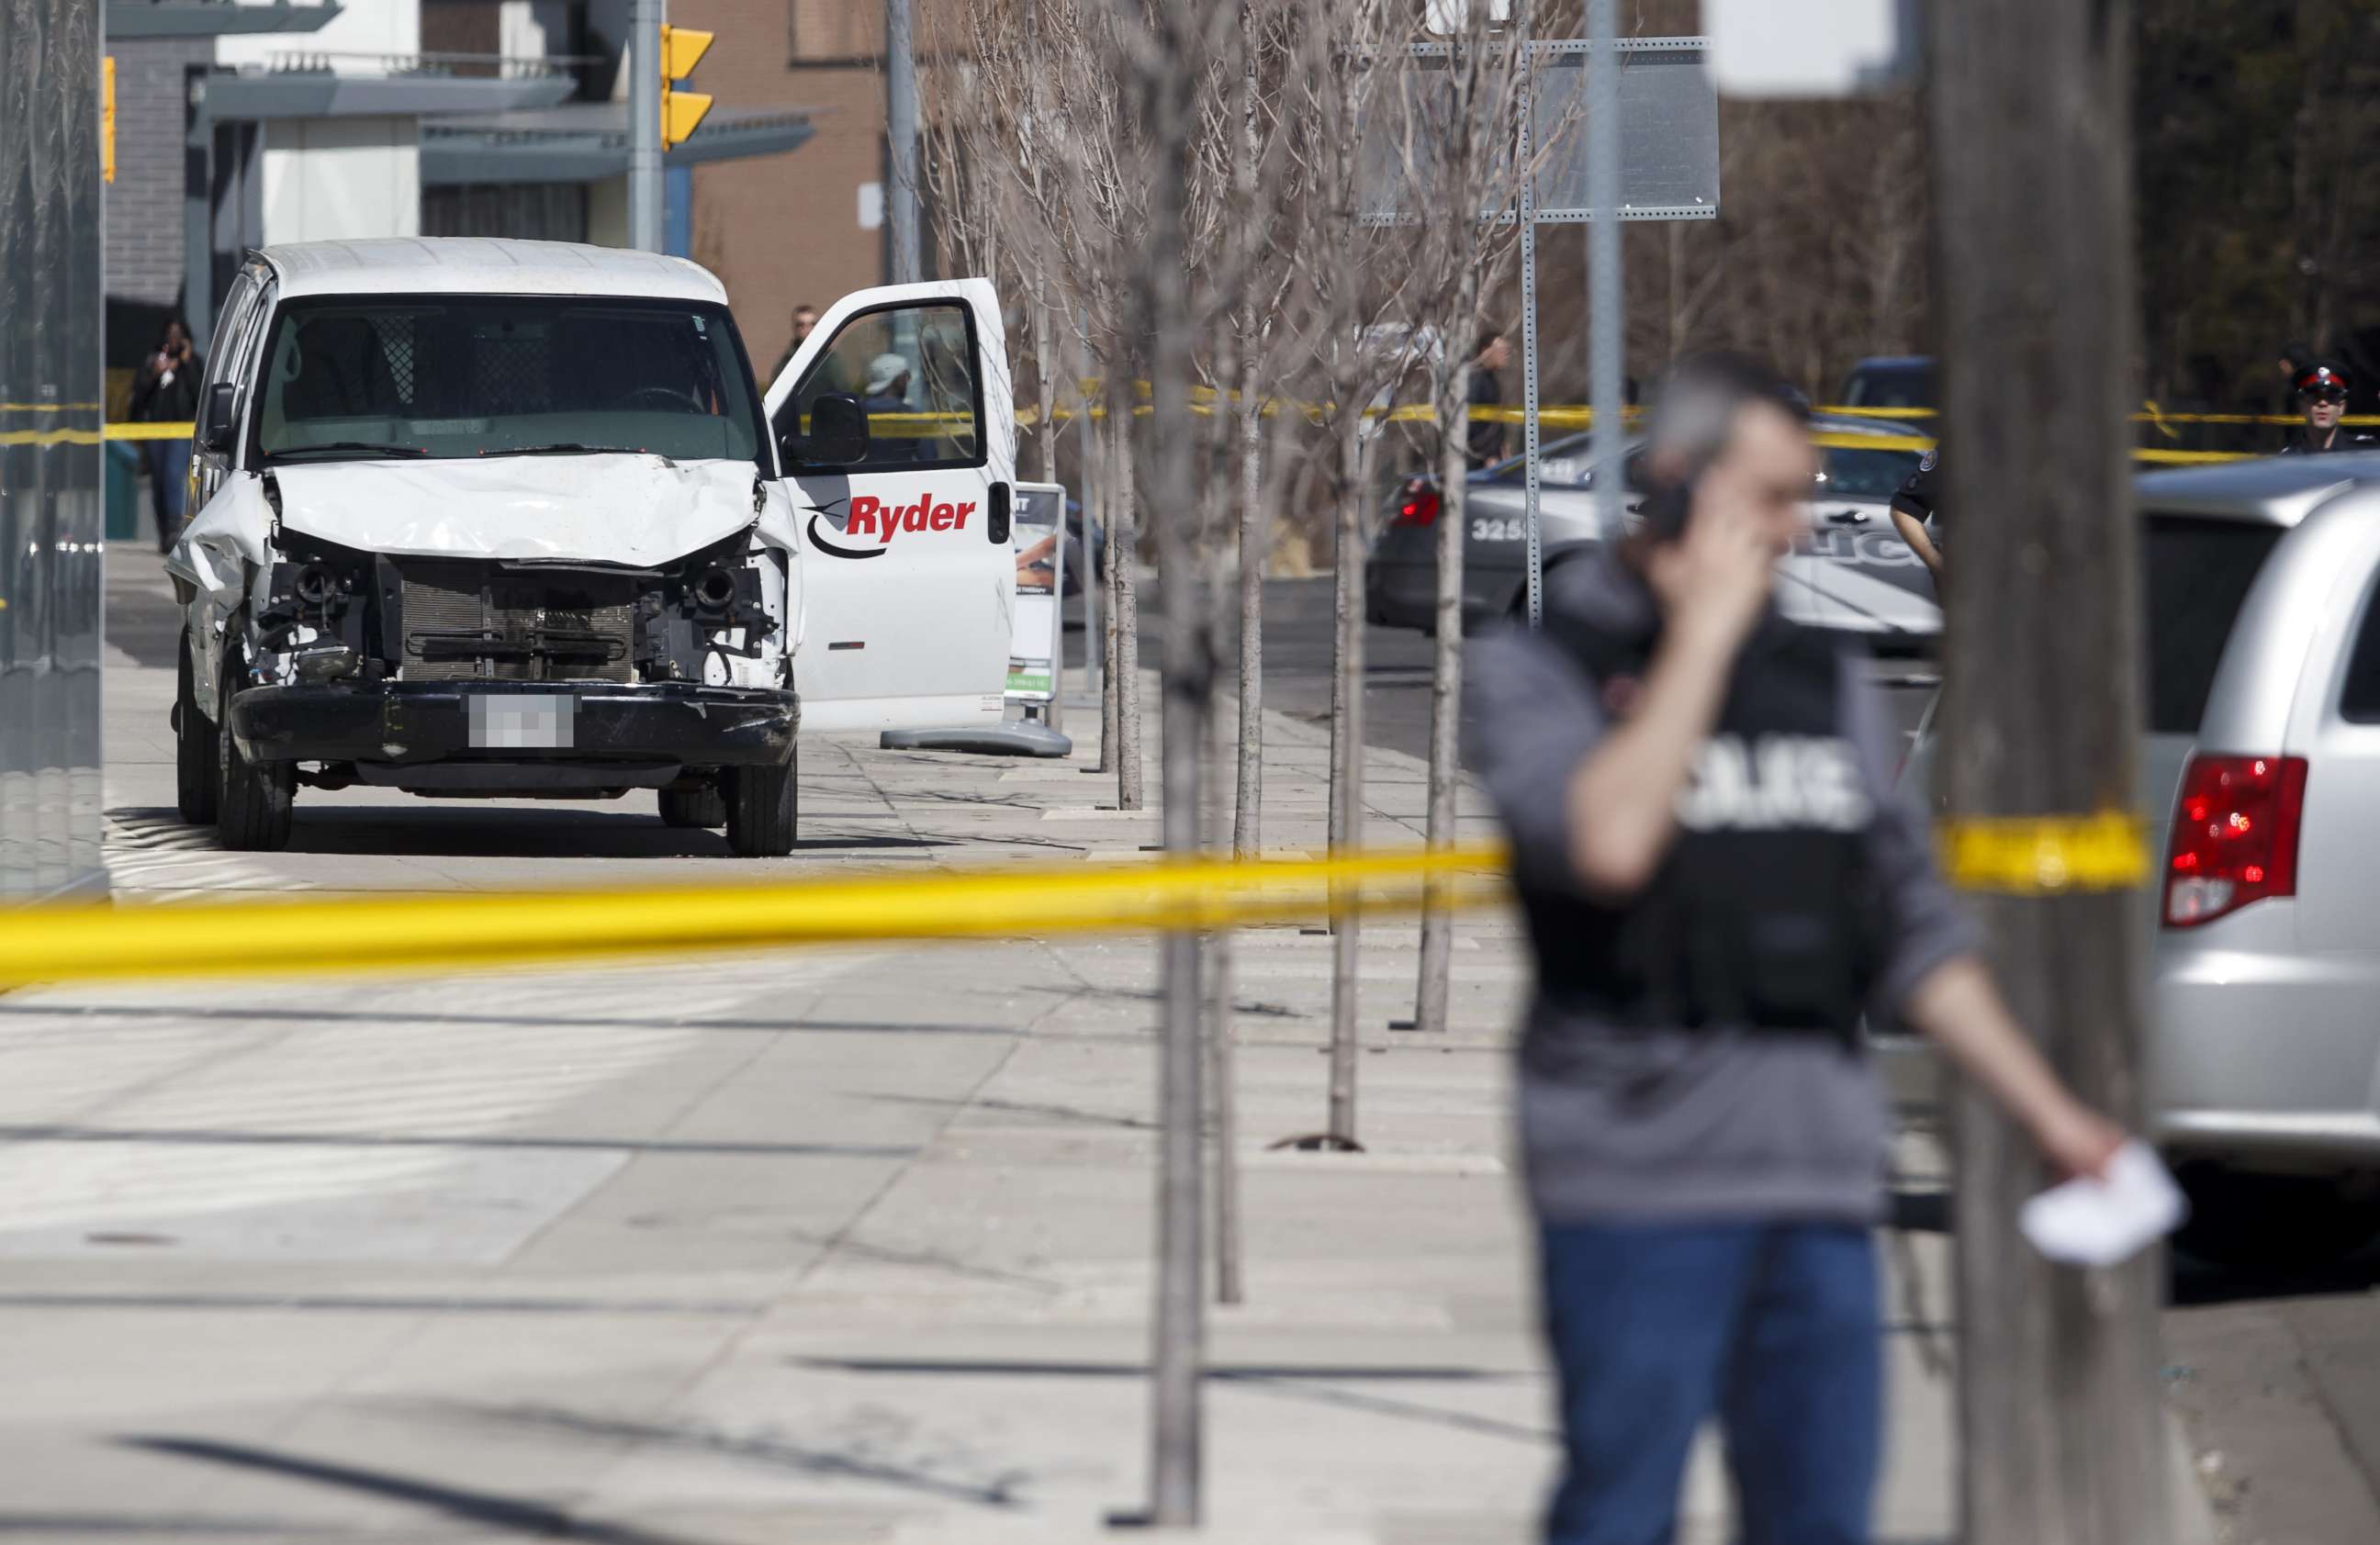 PHOTO: Police inspect a van suspected of being involved in a collision injuring at least eight people at Yonge St. and Finch Ave., April 23, 2018, in Toronto, Canada.